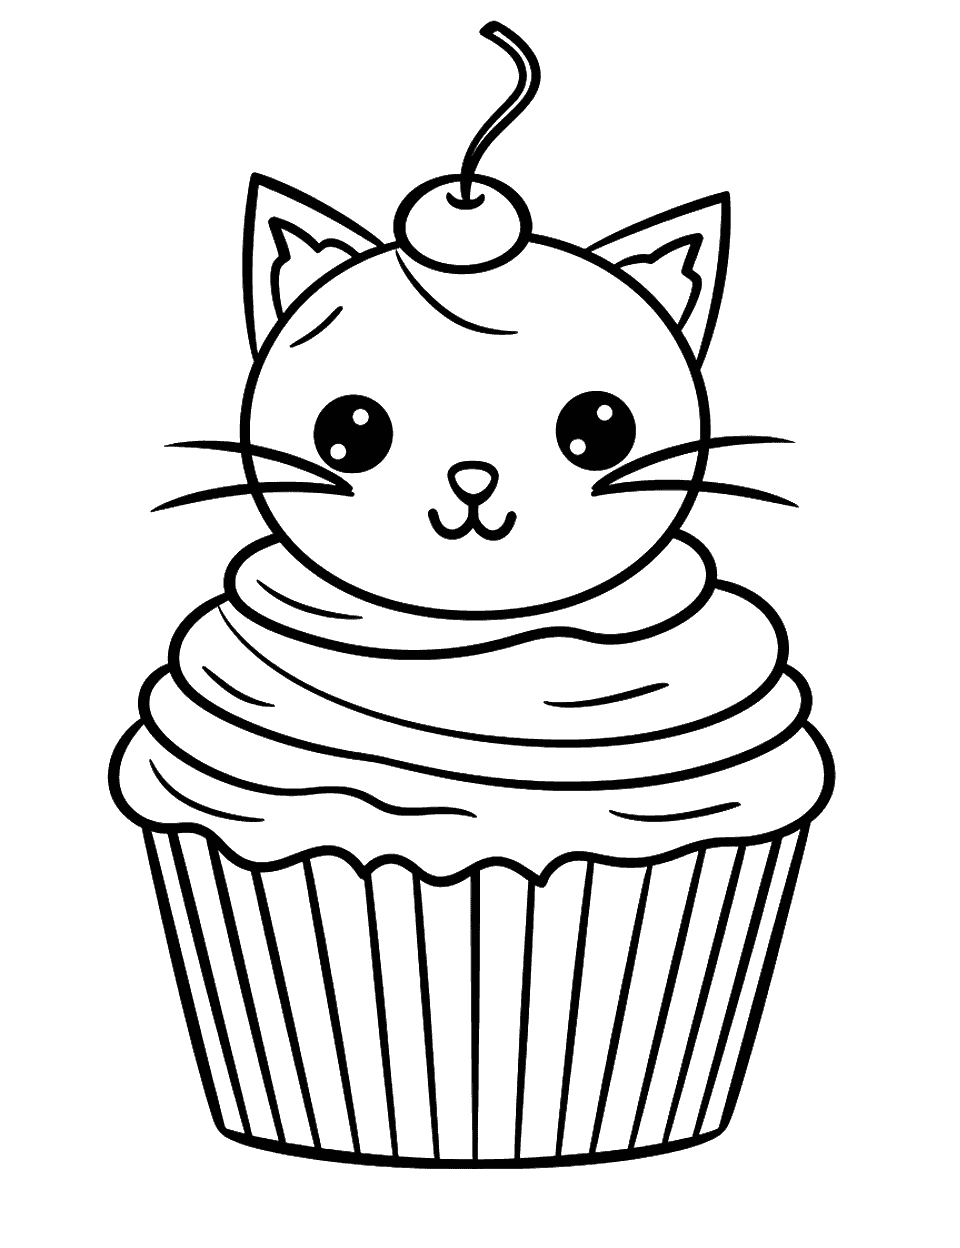 Pete the Cat Cupcake Coloring Page - A cupcake decorated to look like Pete the Cat.